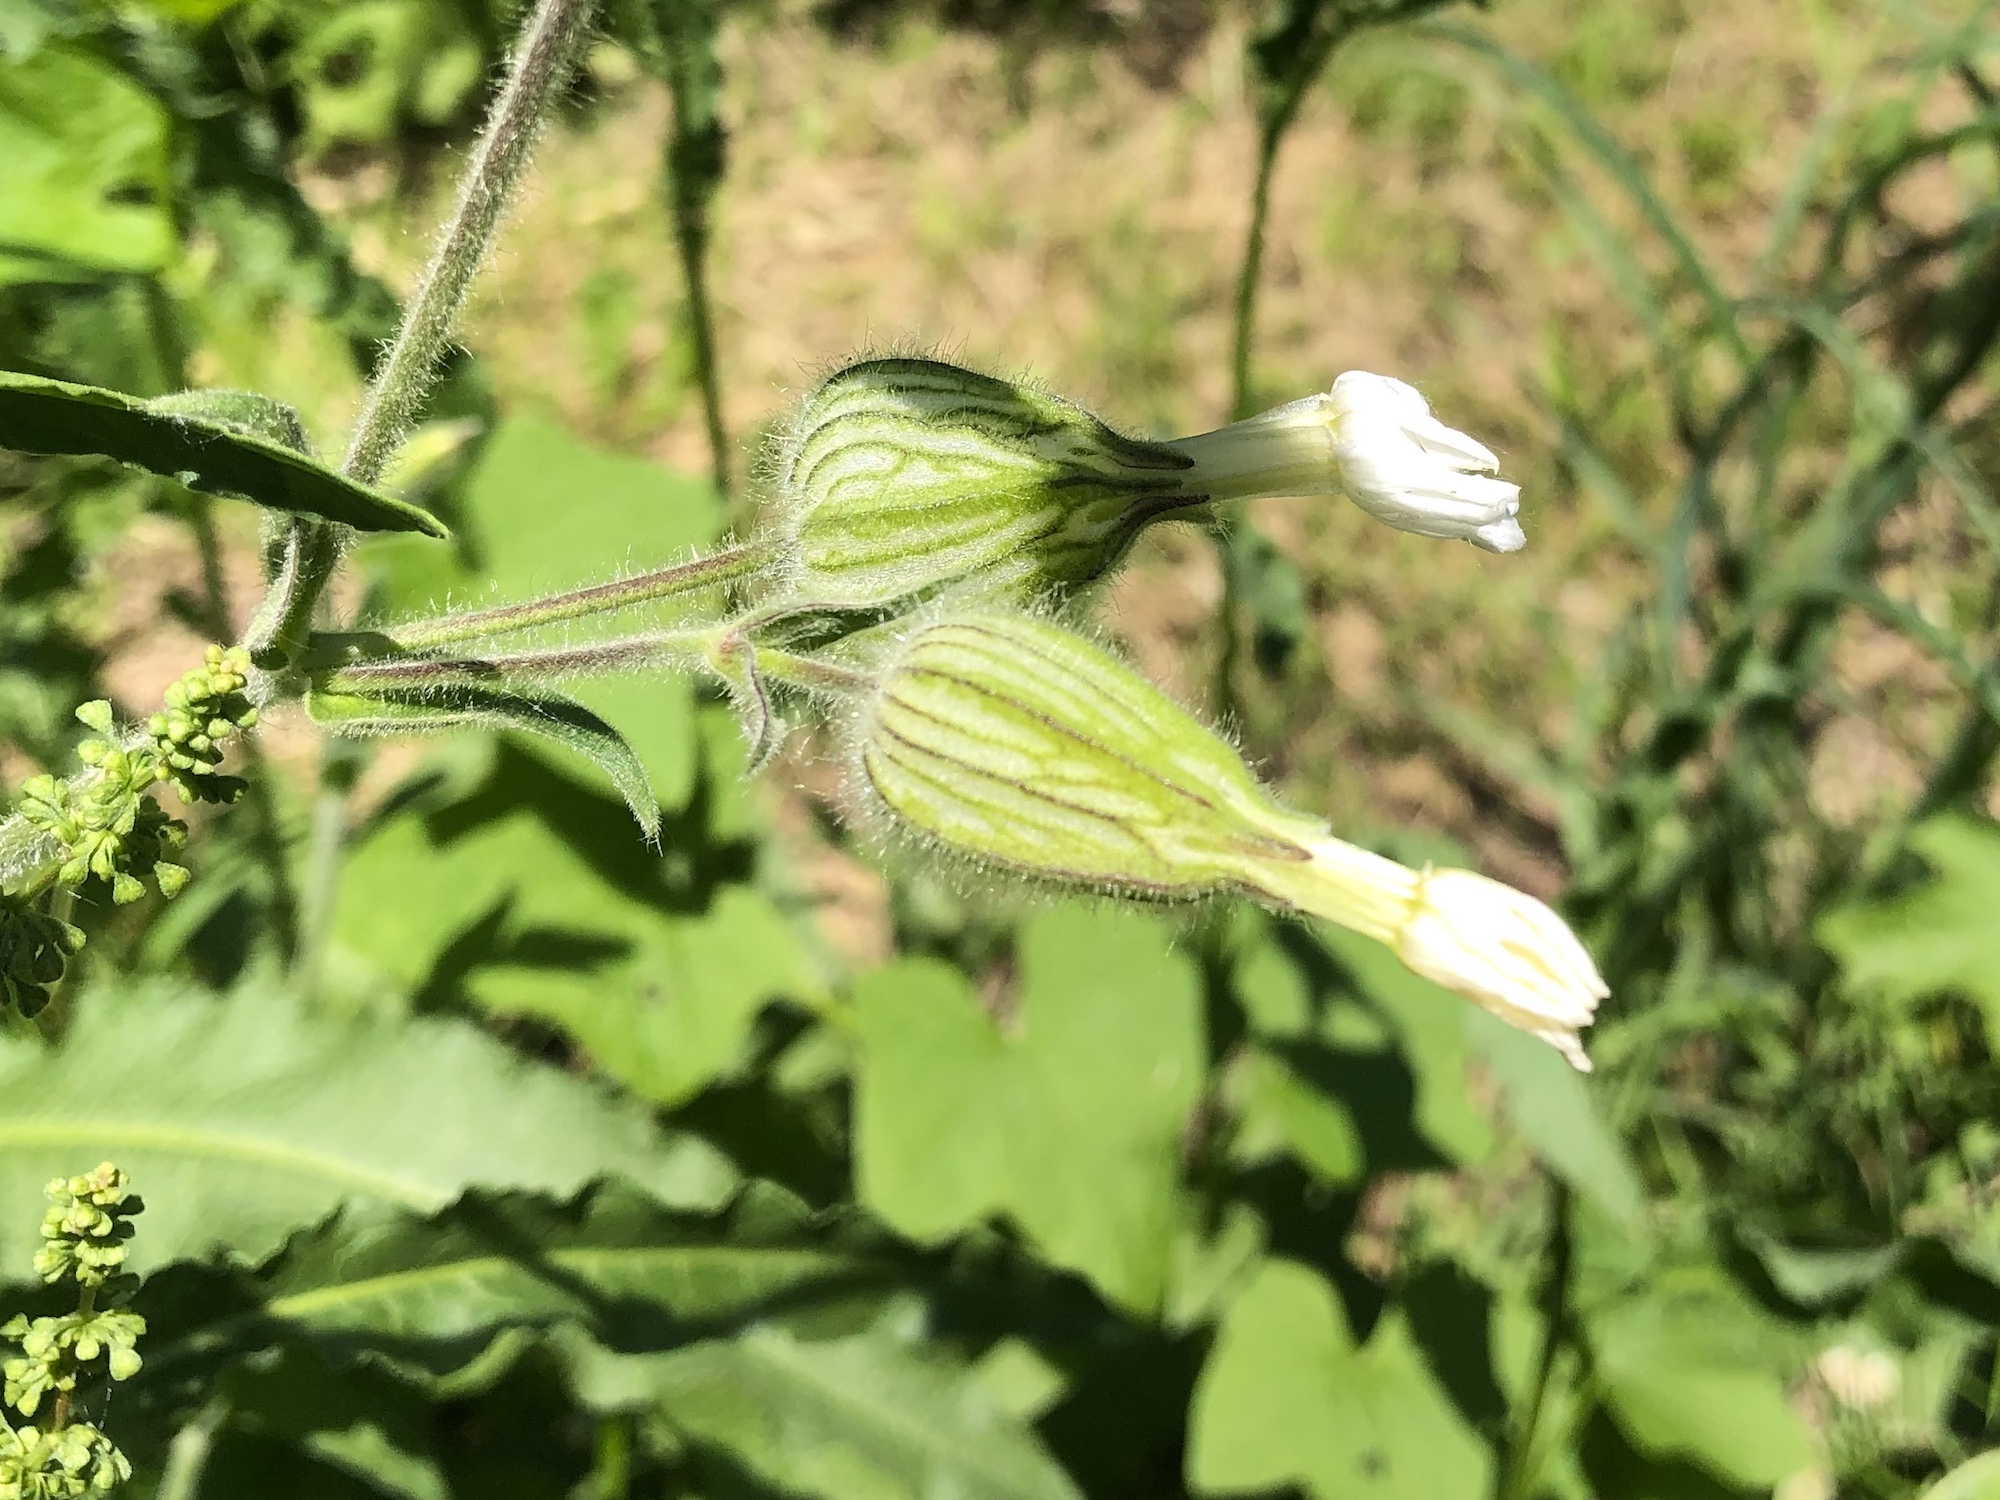  White Campion closed up for the day by Marion Dunn on June 10, 2019.